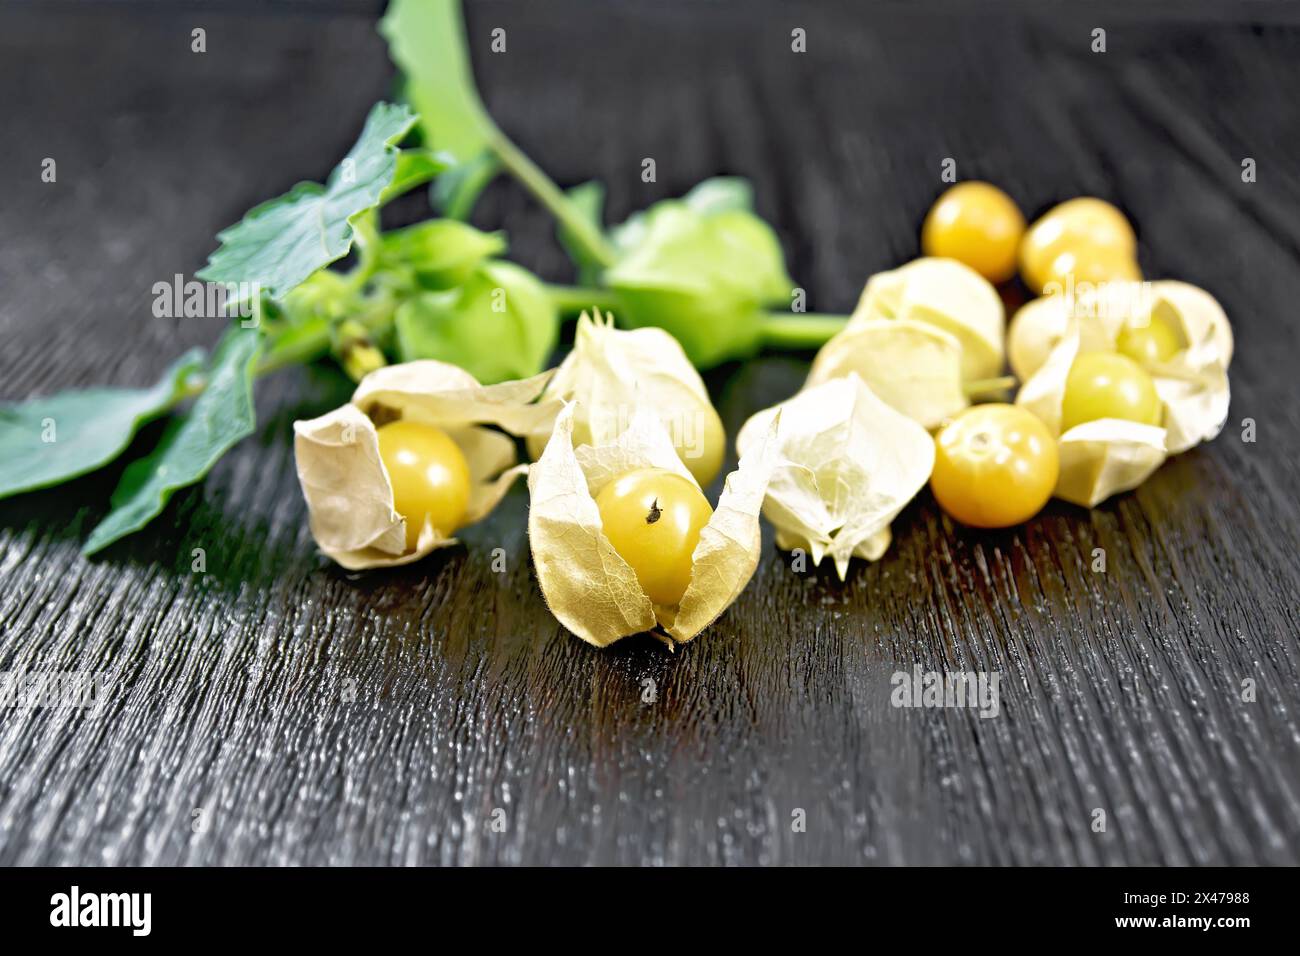 Physalis ripe yellow, twig with green leaves on the background of a wooden board Stock Photo